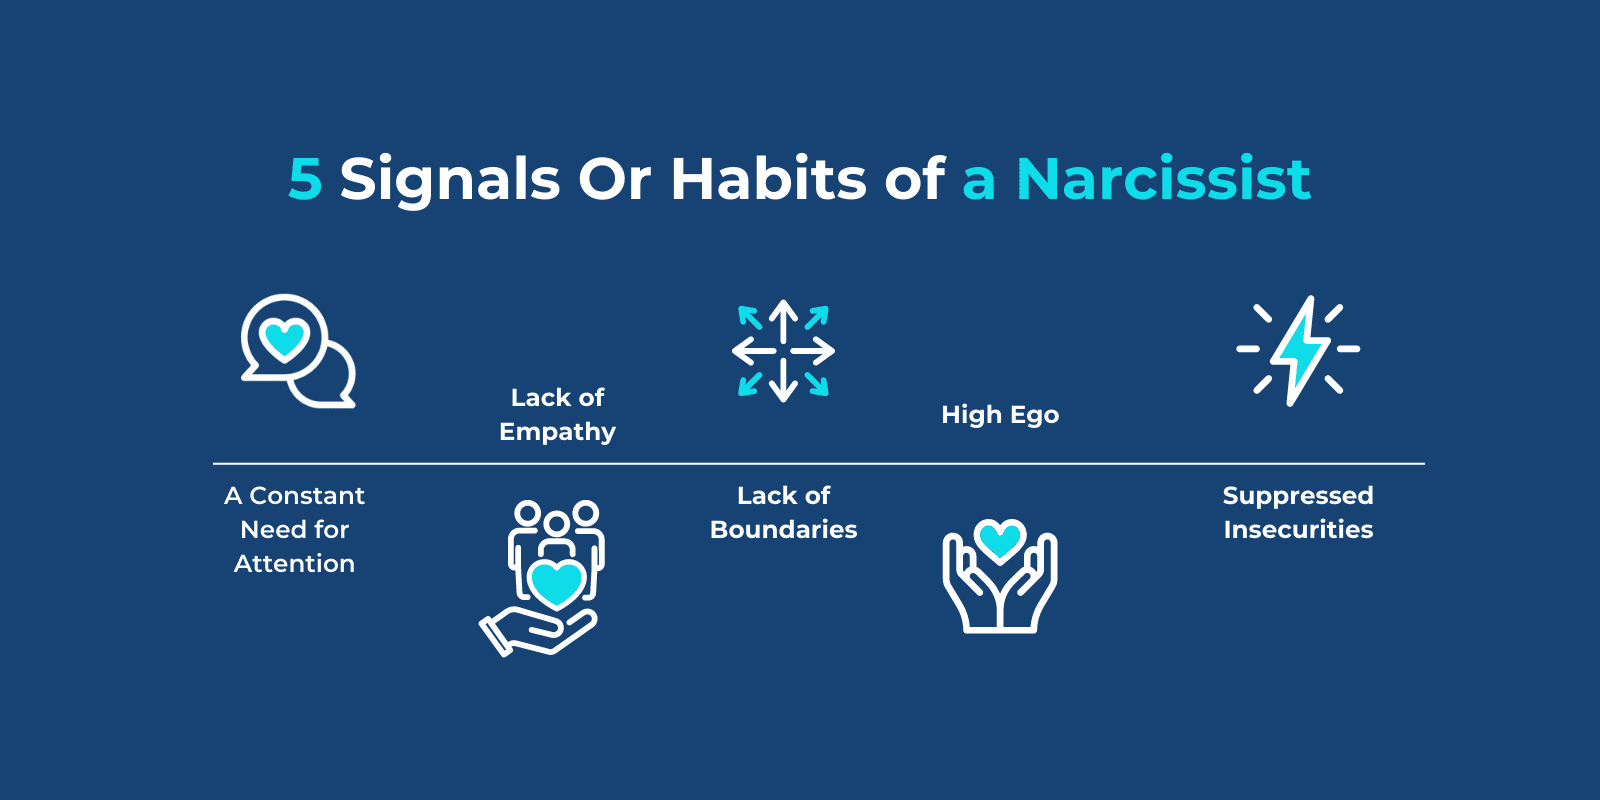 5 Signals or habits of a narcissist illustrated with relevant icons